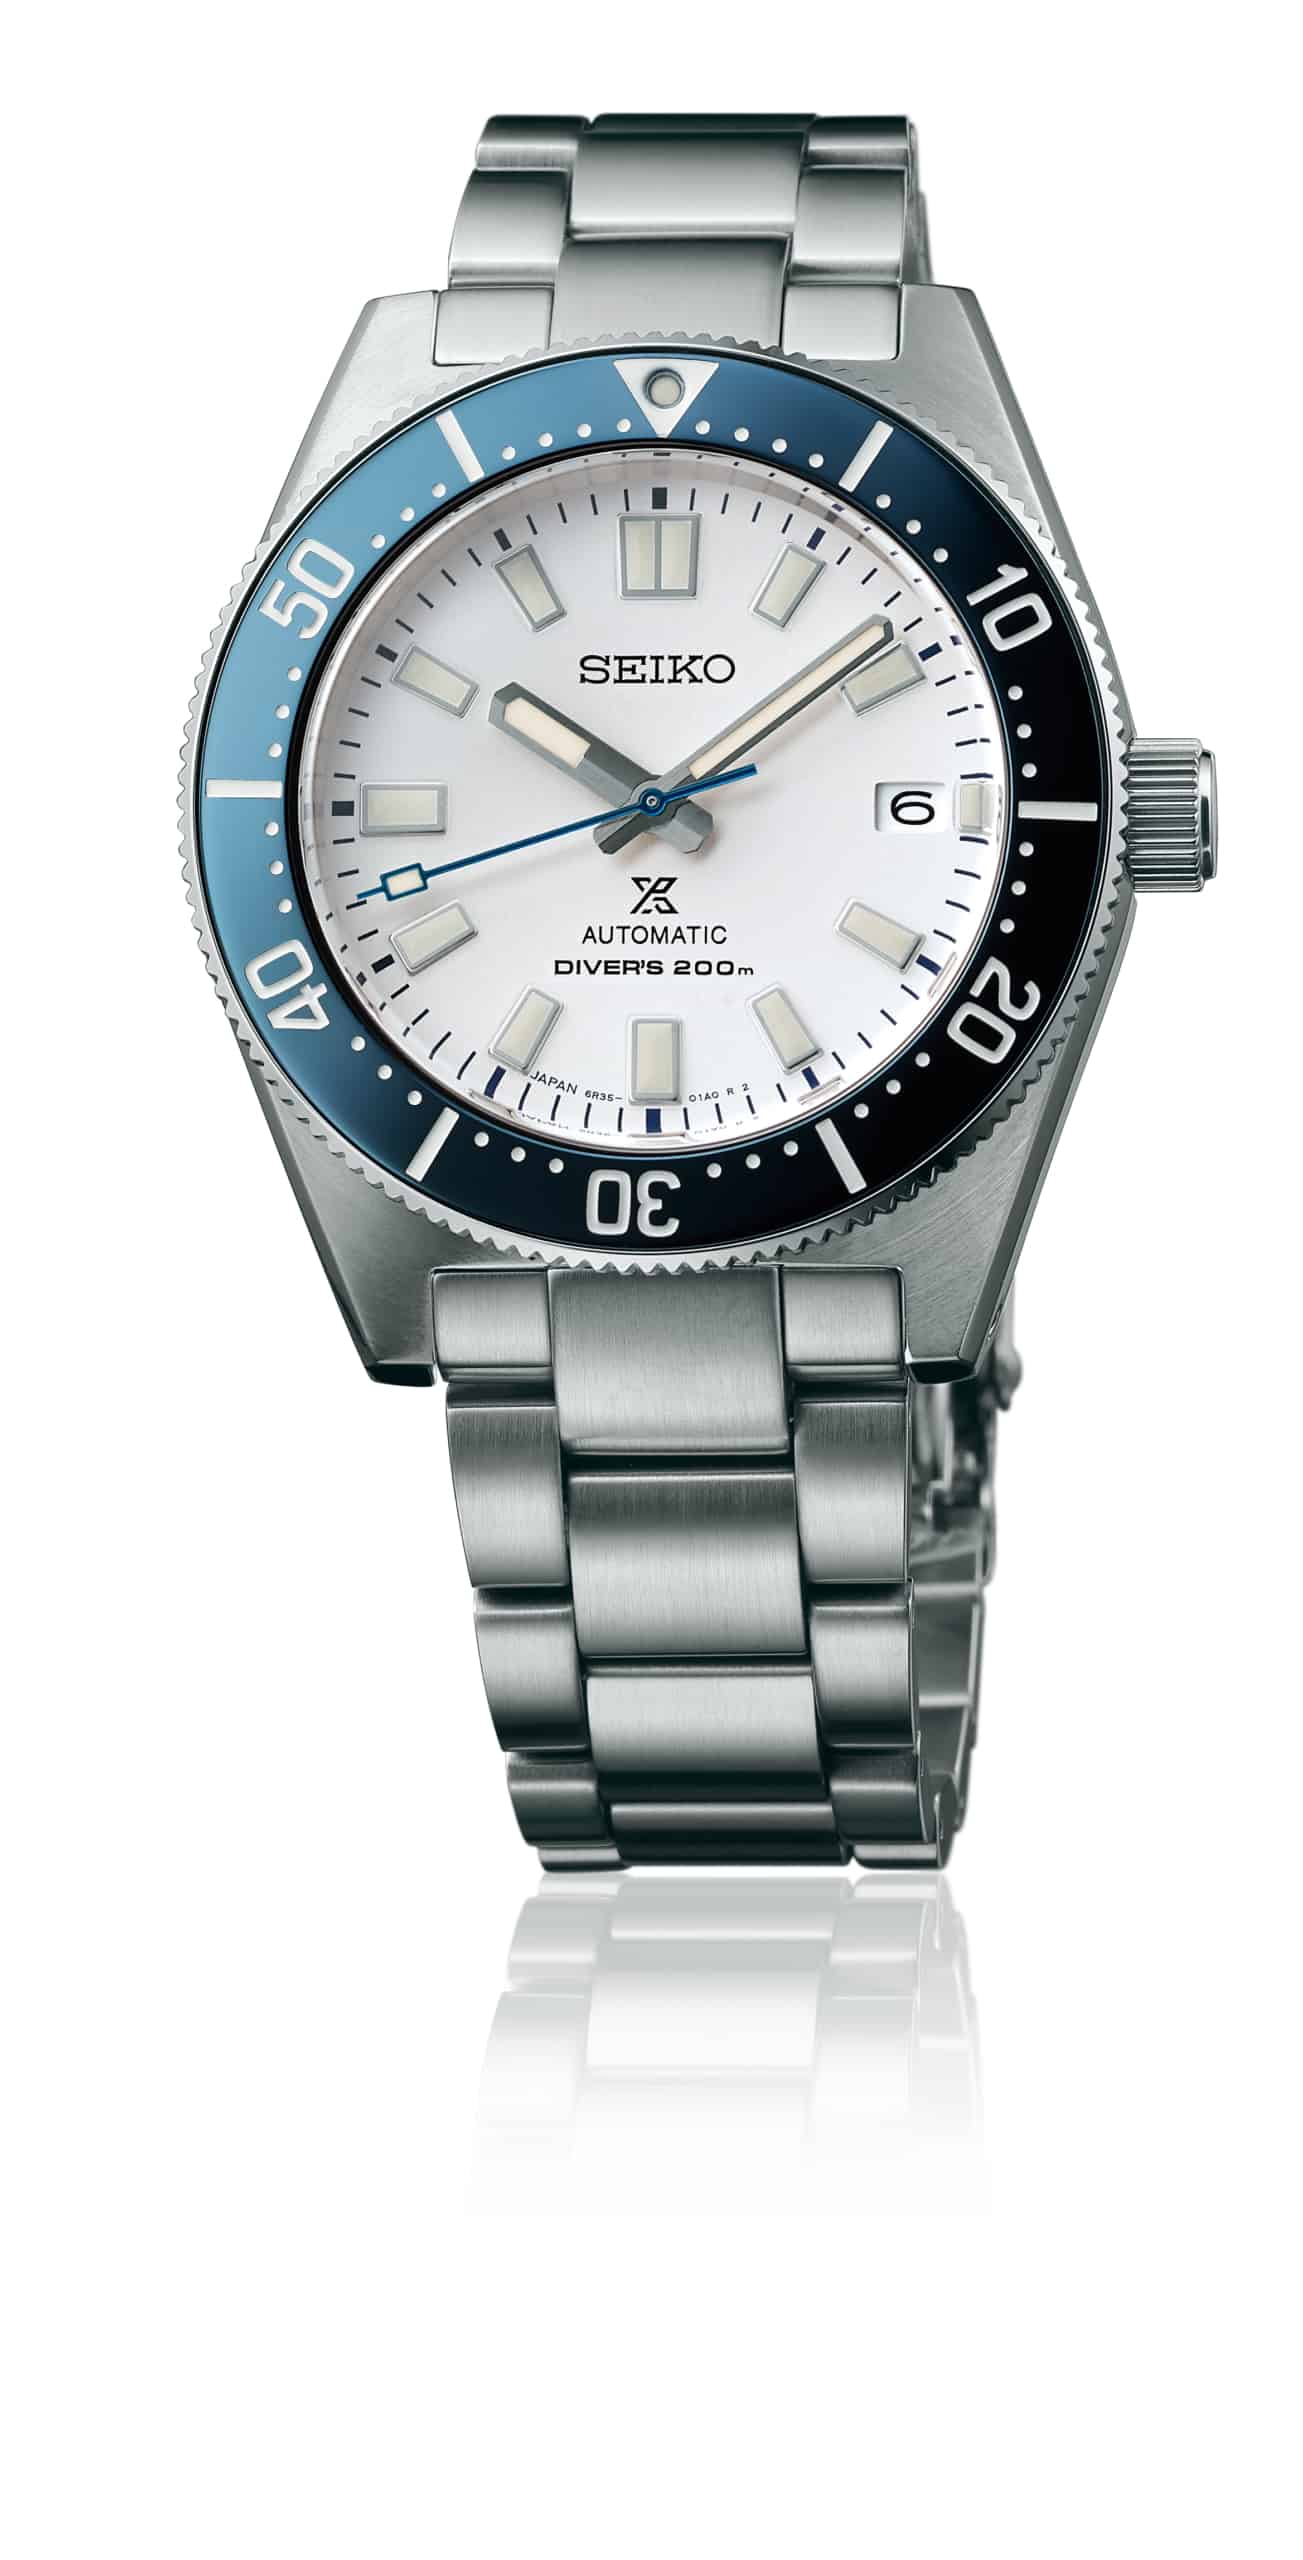 Seiko Celebrates 140 Years With Four New Limited Editions - Worn & Wound